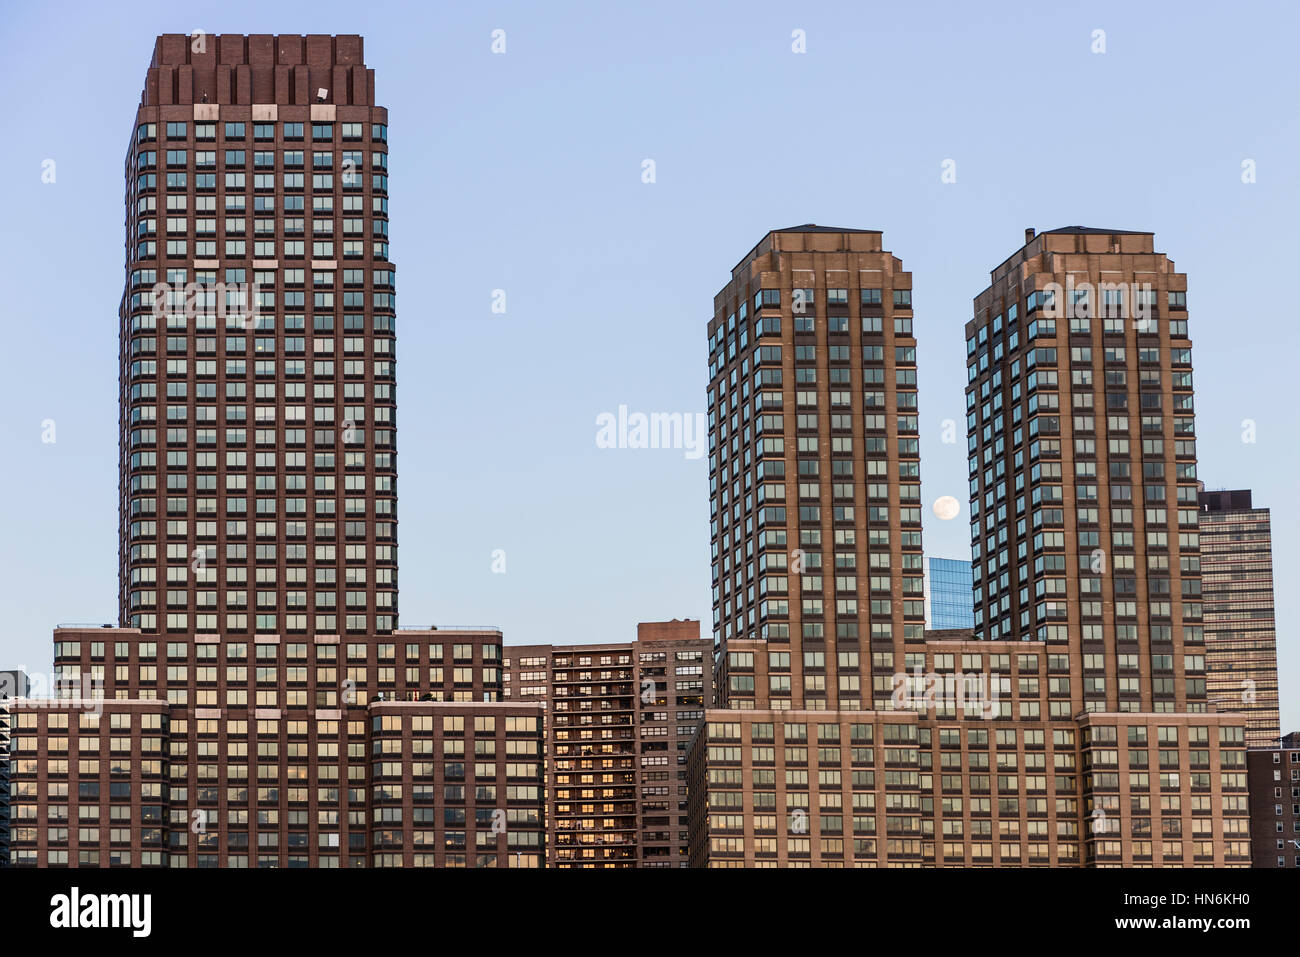 New York, USA - June 18, 2016: Trump residential skyscrapers by Riverfront park during sunset with moon Stock Photo